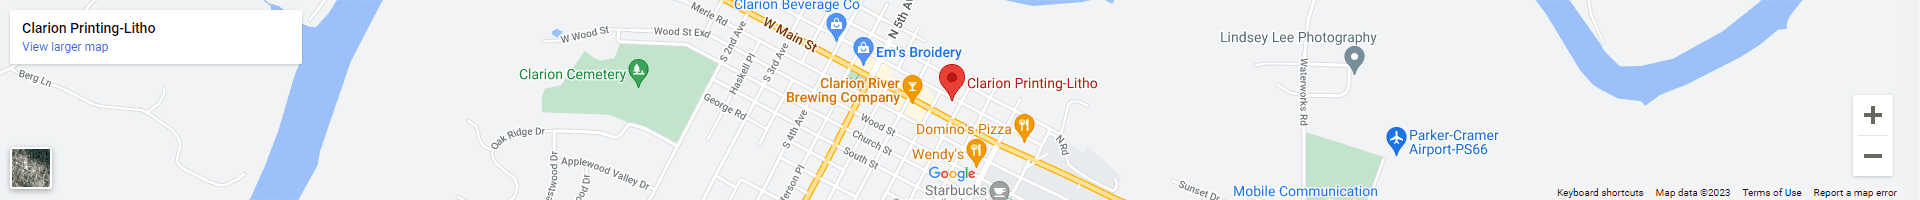 Clarion Printing